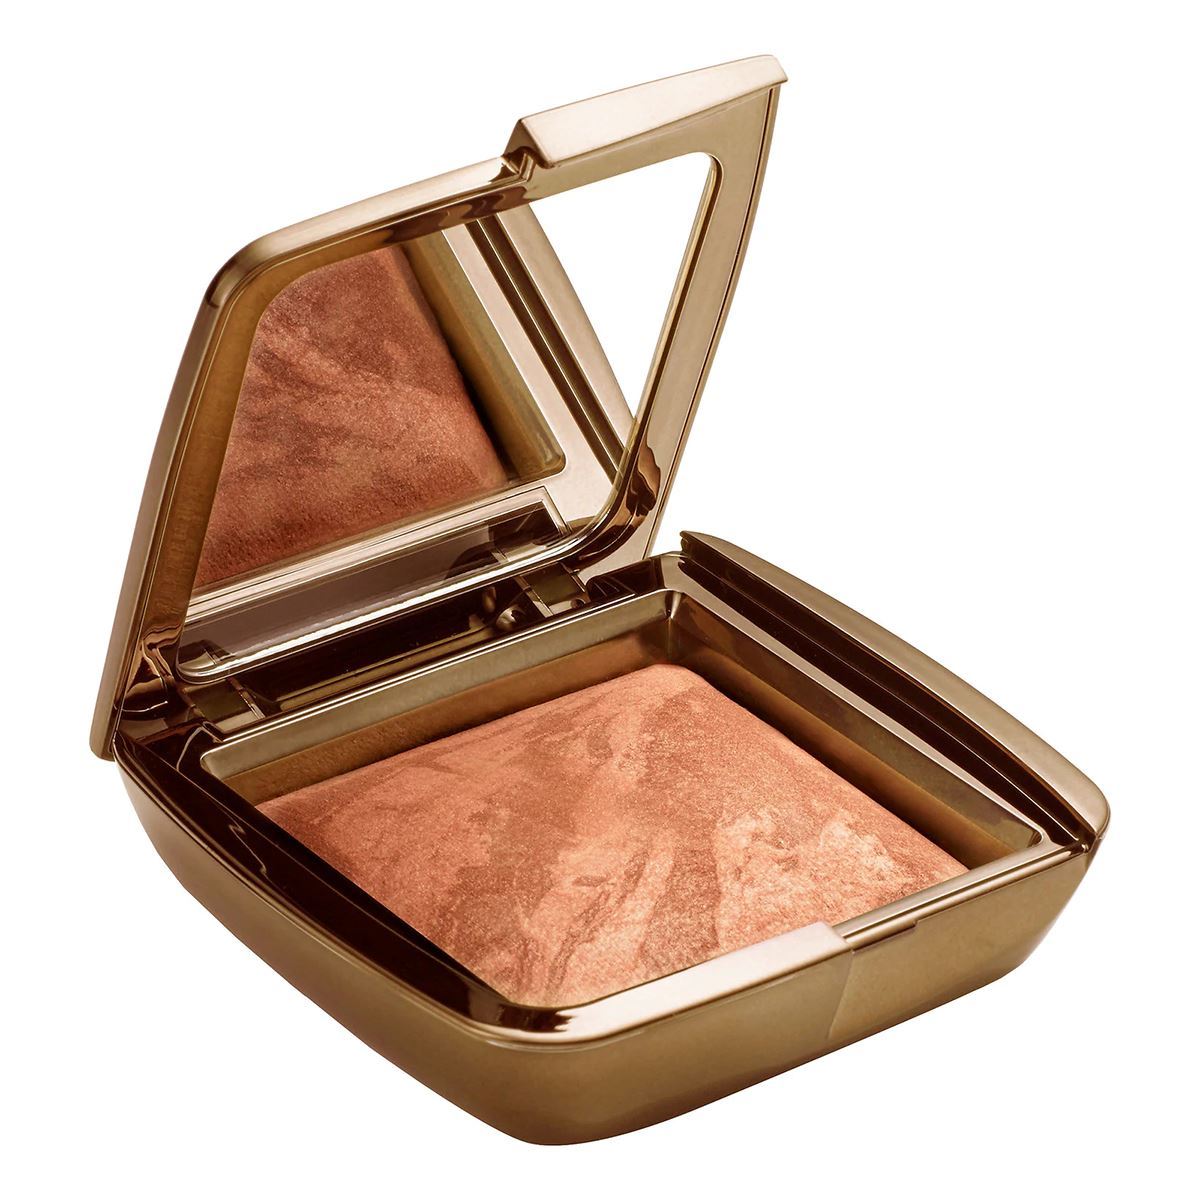 Picture of Hourglass Ambient Lighting Blush